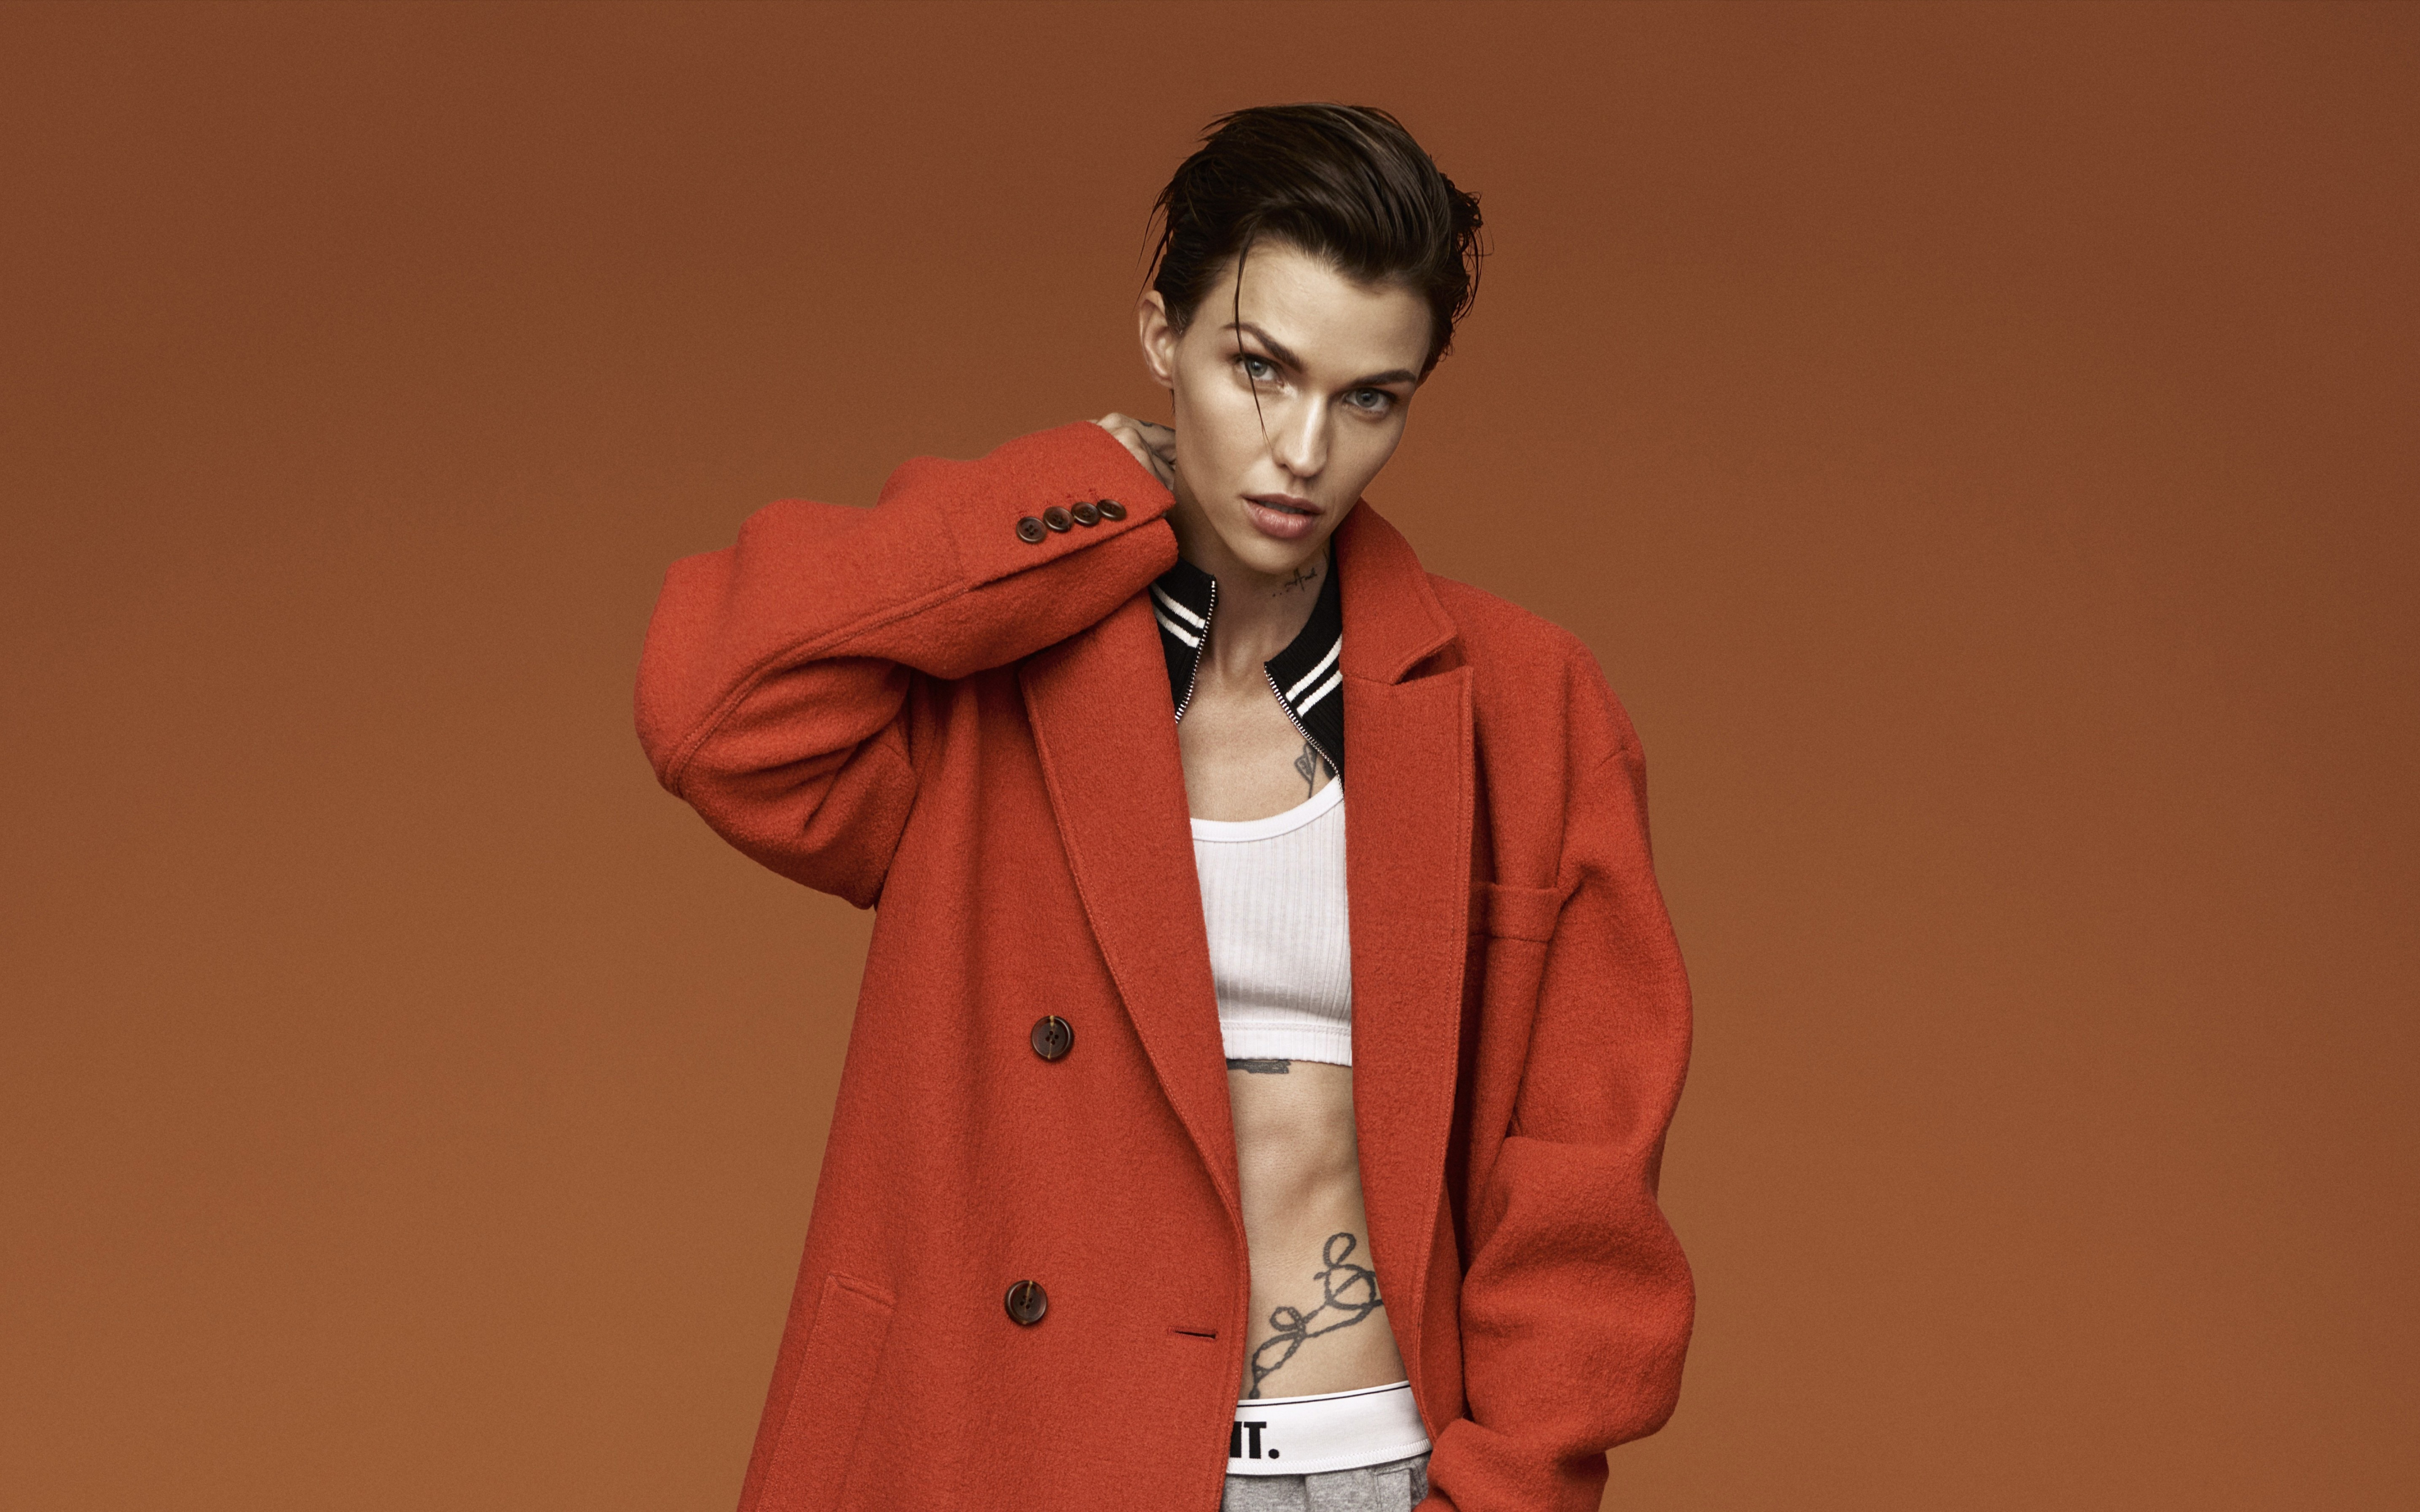 Download 3840x2400 Wallpaper Ruby Rose Short Hair Celebrity Images, Photos, Reviews